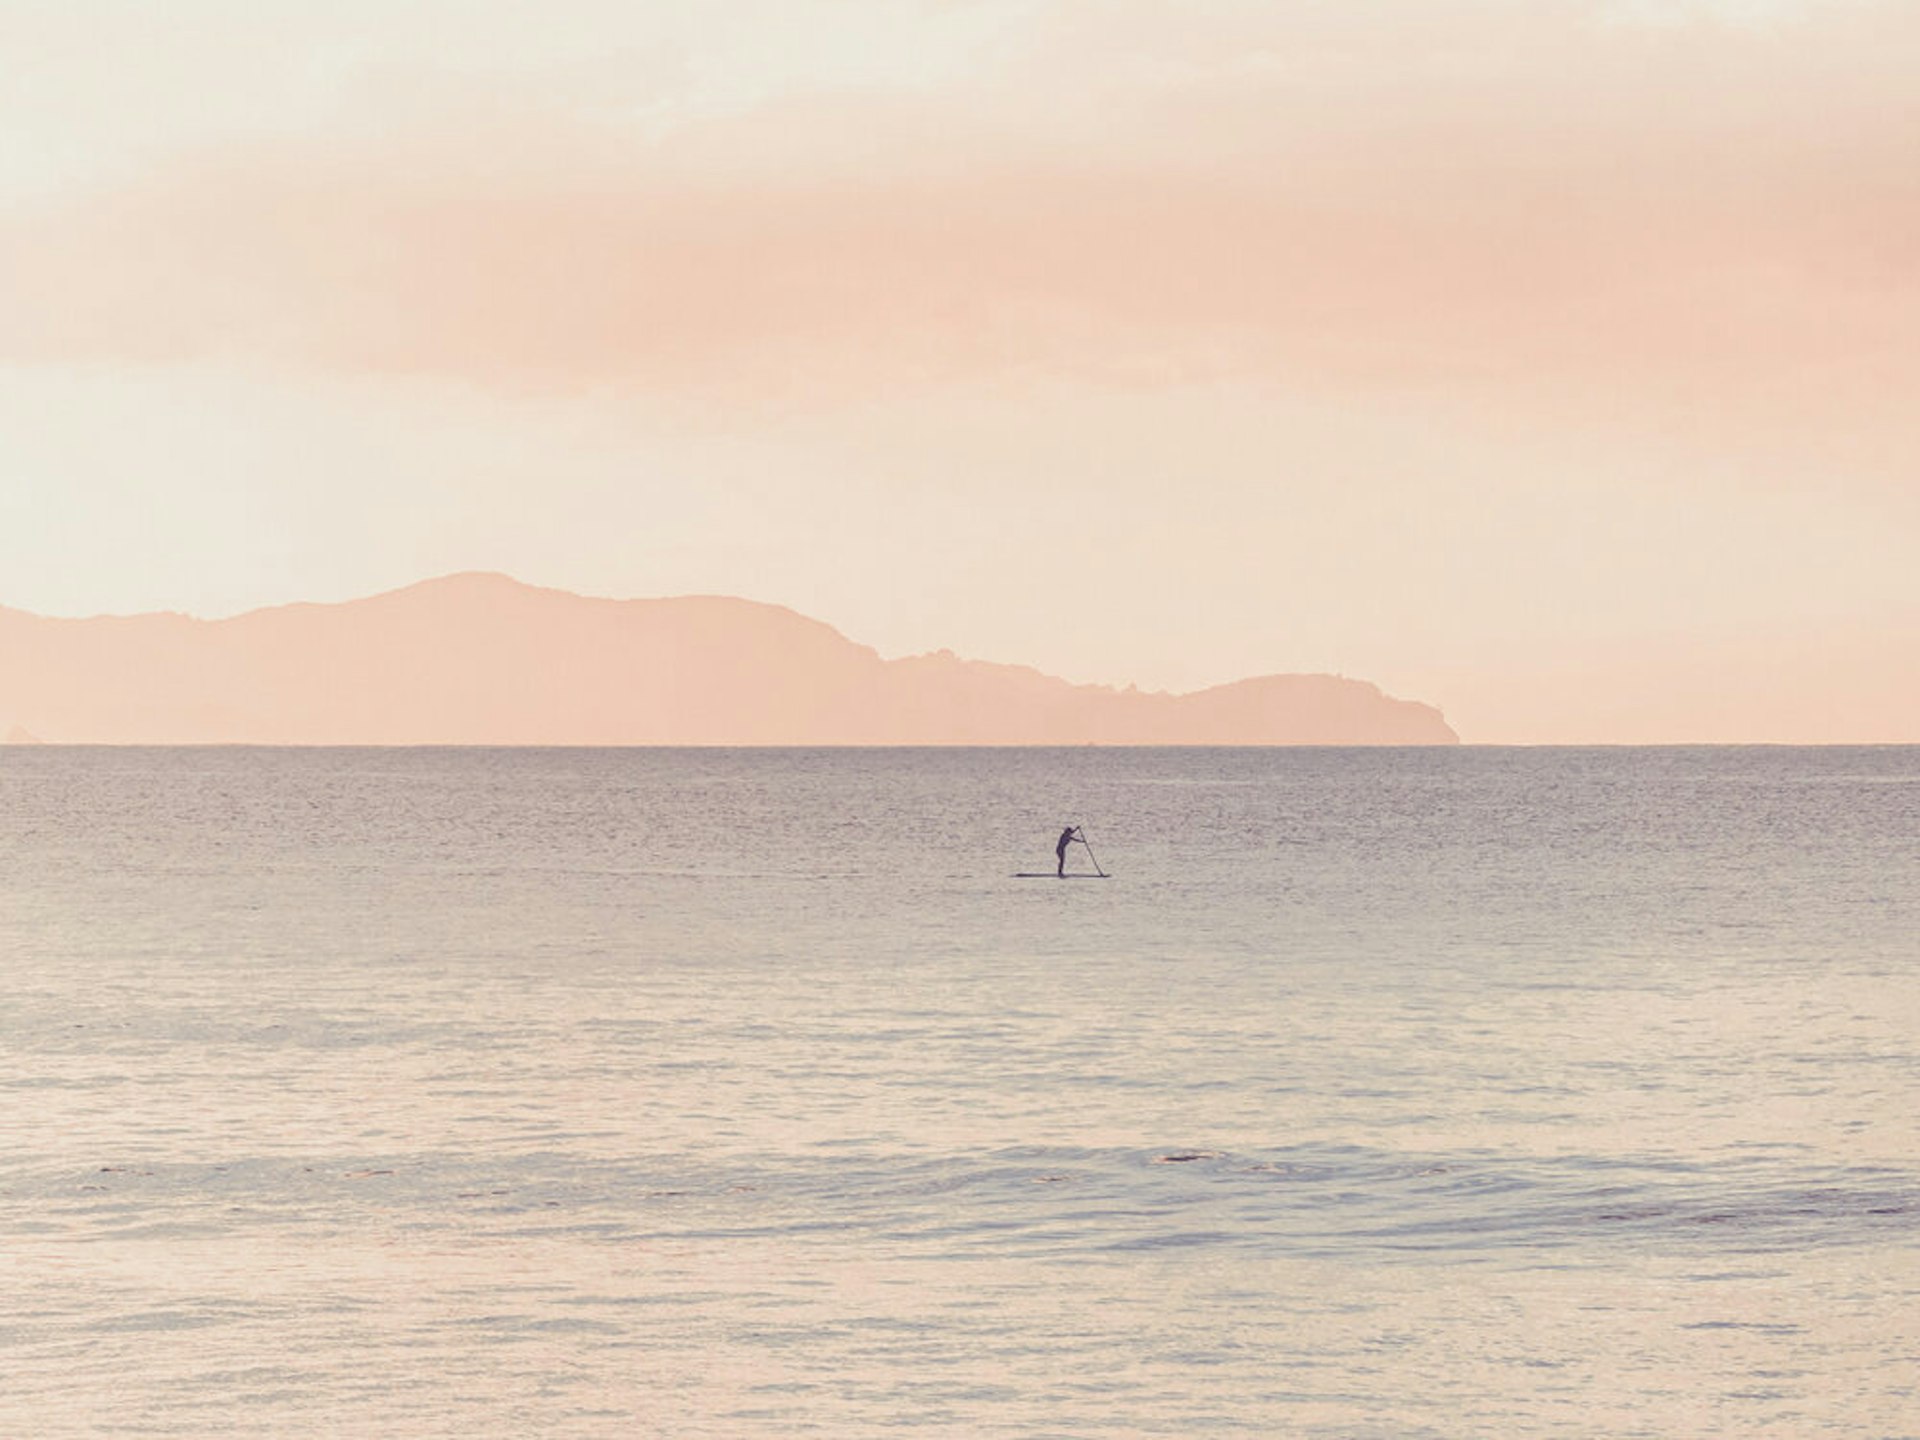 Ocean with lone stand-up paddle boarder in the distance.